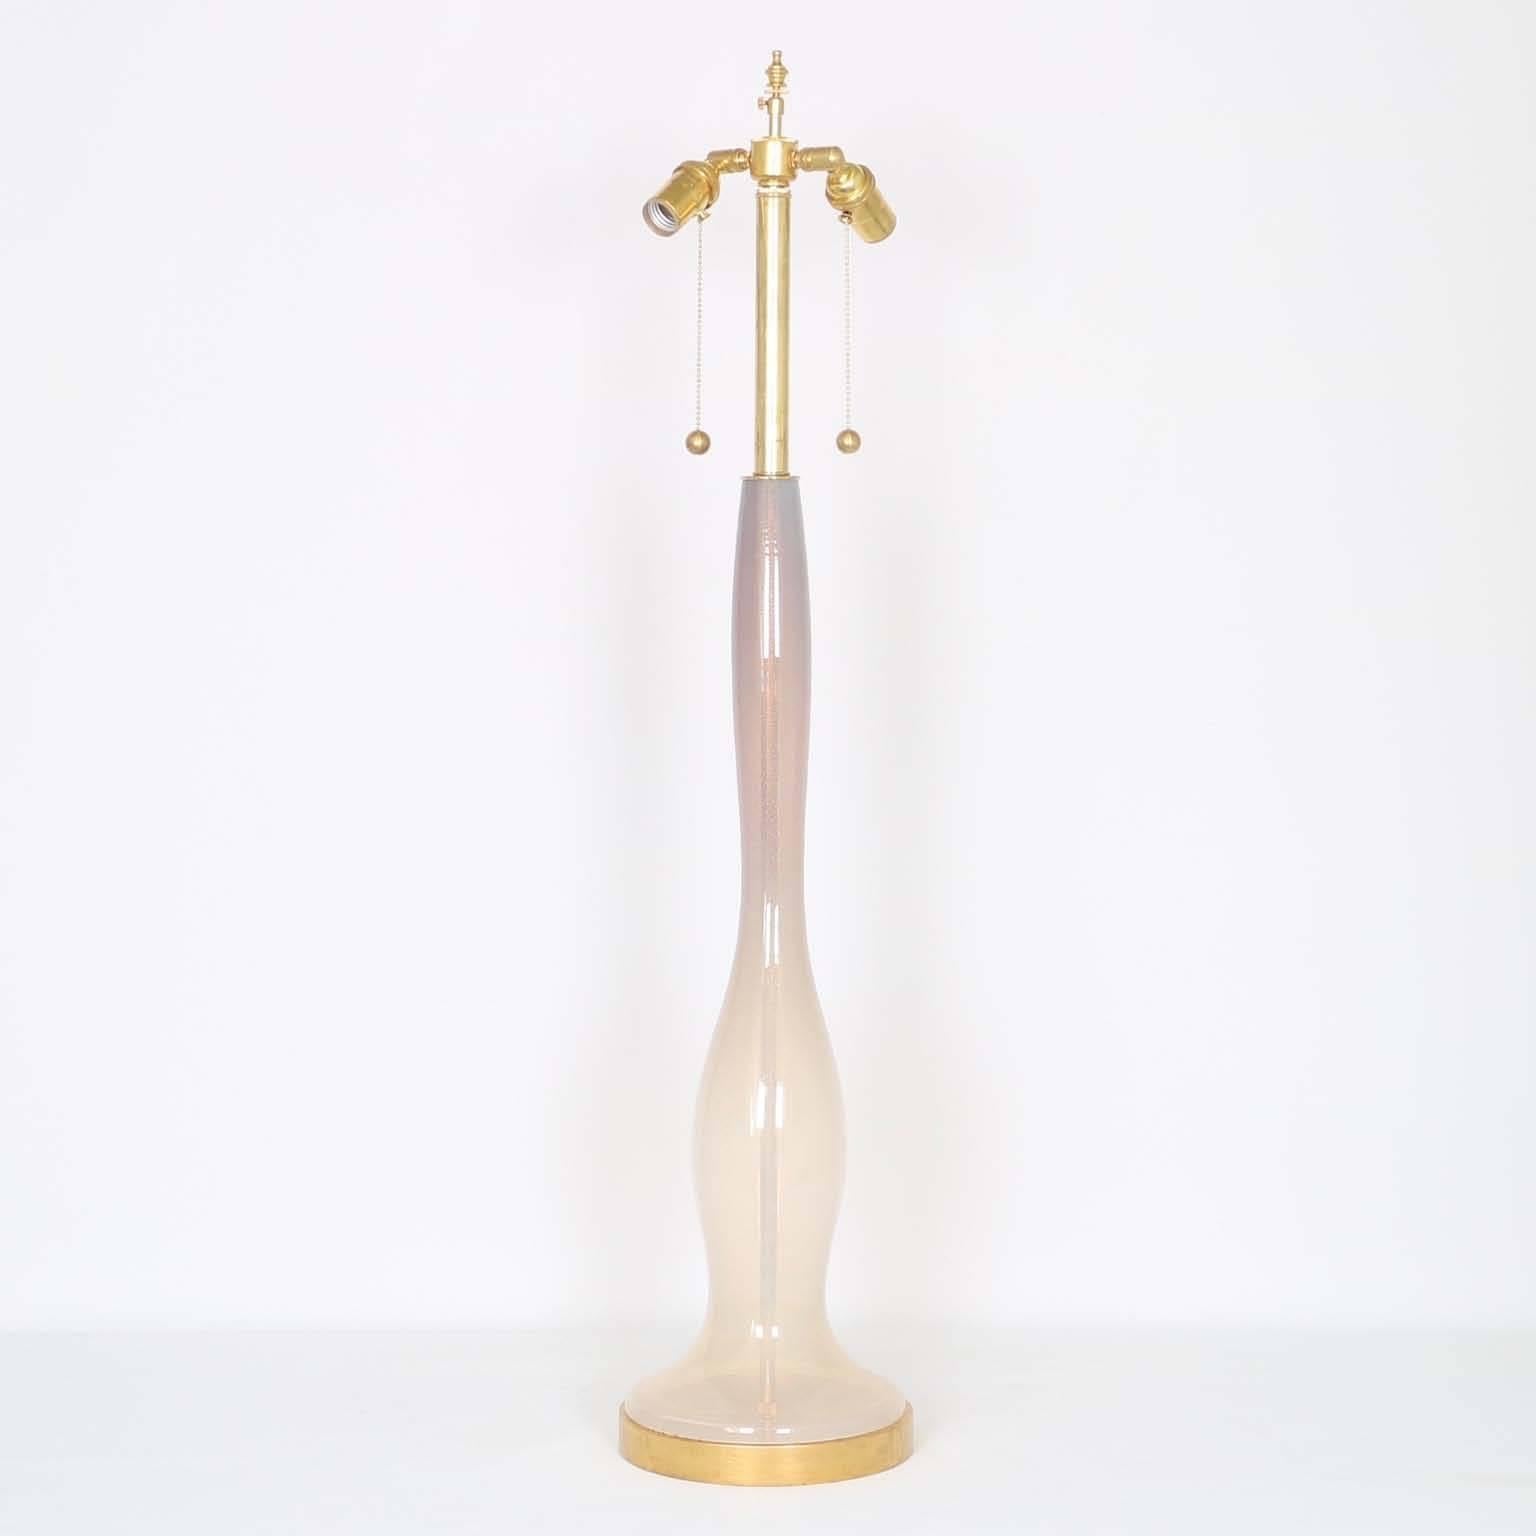 An exceptional baluster form glass lamp by Fratelli Toso, produced circa 1950s Murano Italy, in ombre colors from amethyst to pink opaline with gold infusions. Mounted on a gilded wooden base. The noted height is to the finial, the height to the top